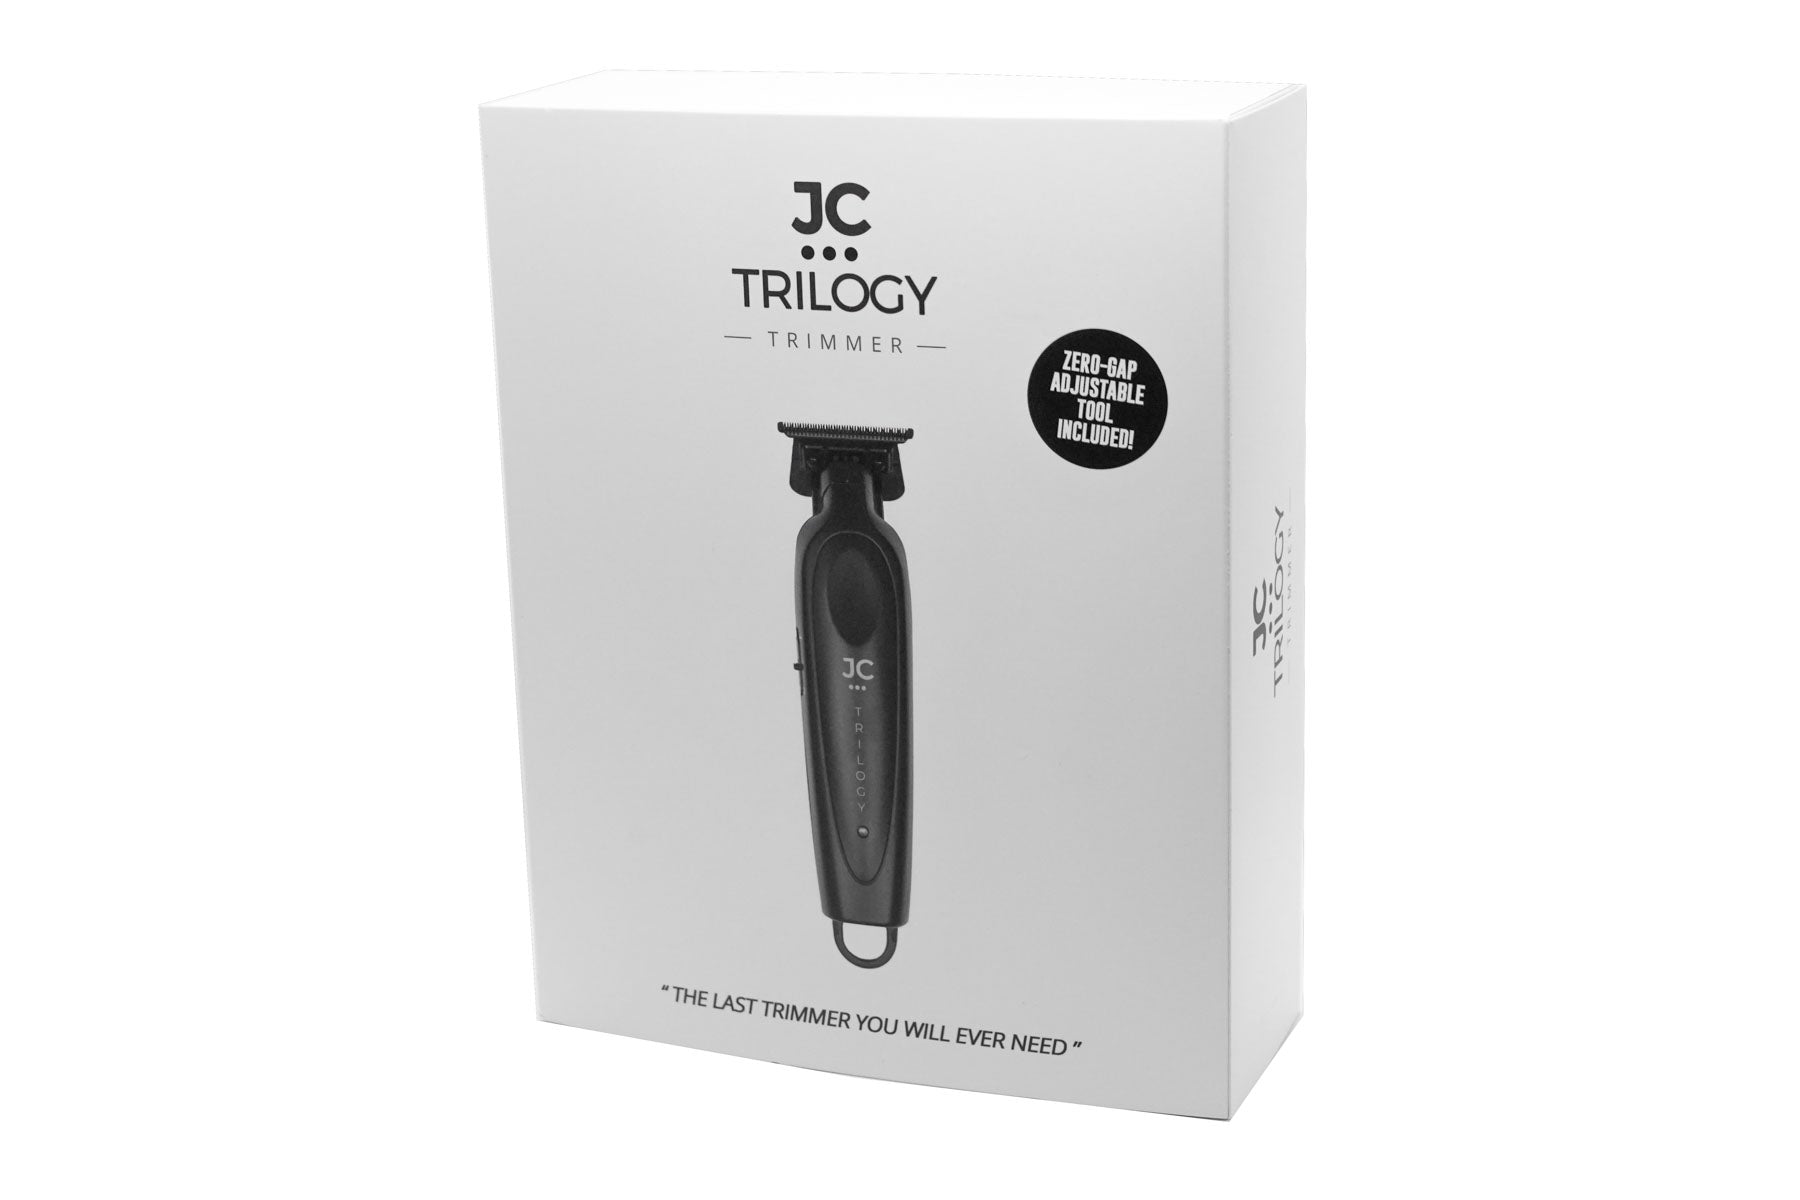 Global Scissors JC TRILOGY TRIMMER - Cordless Rechargeable 2-3hr Runtime